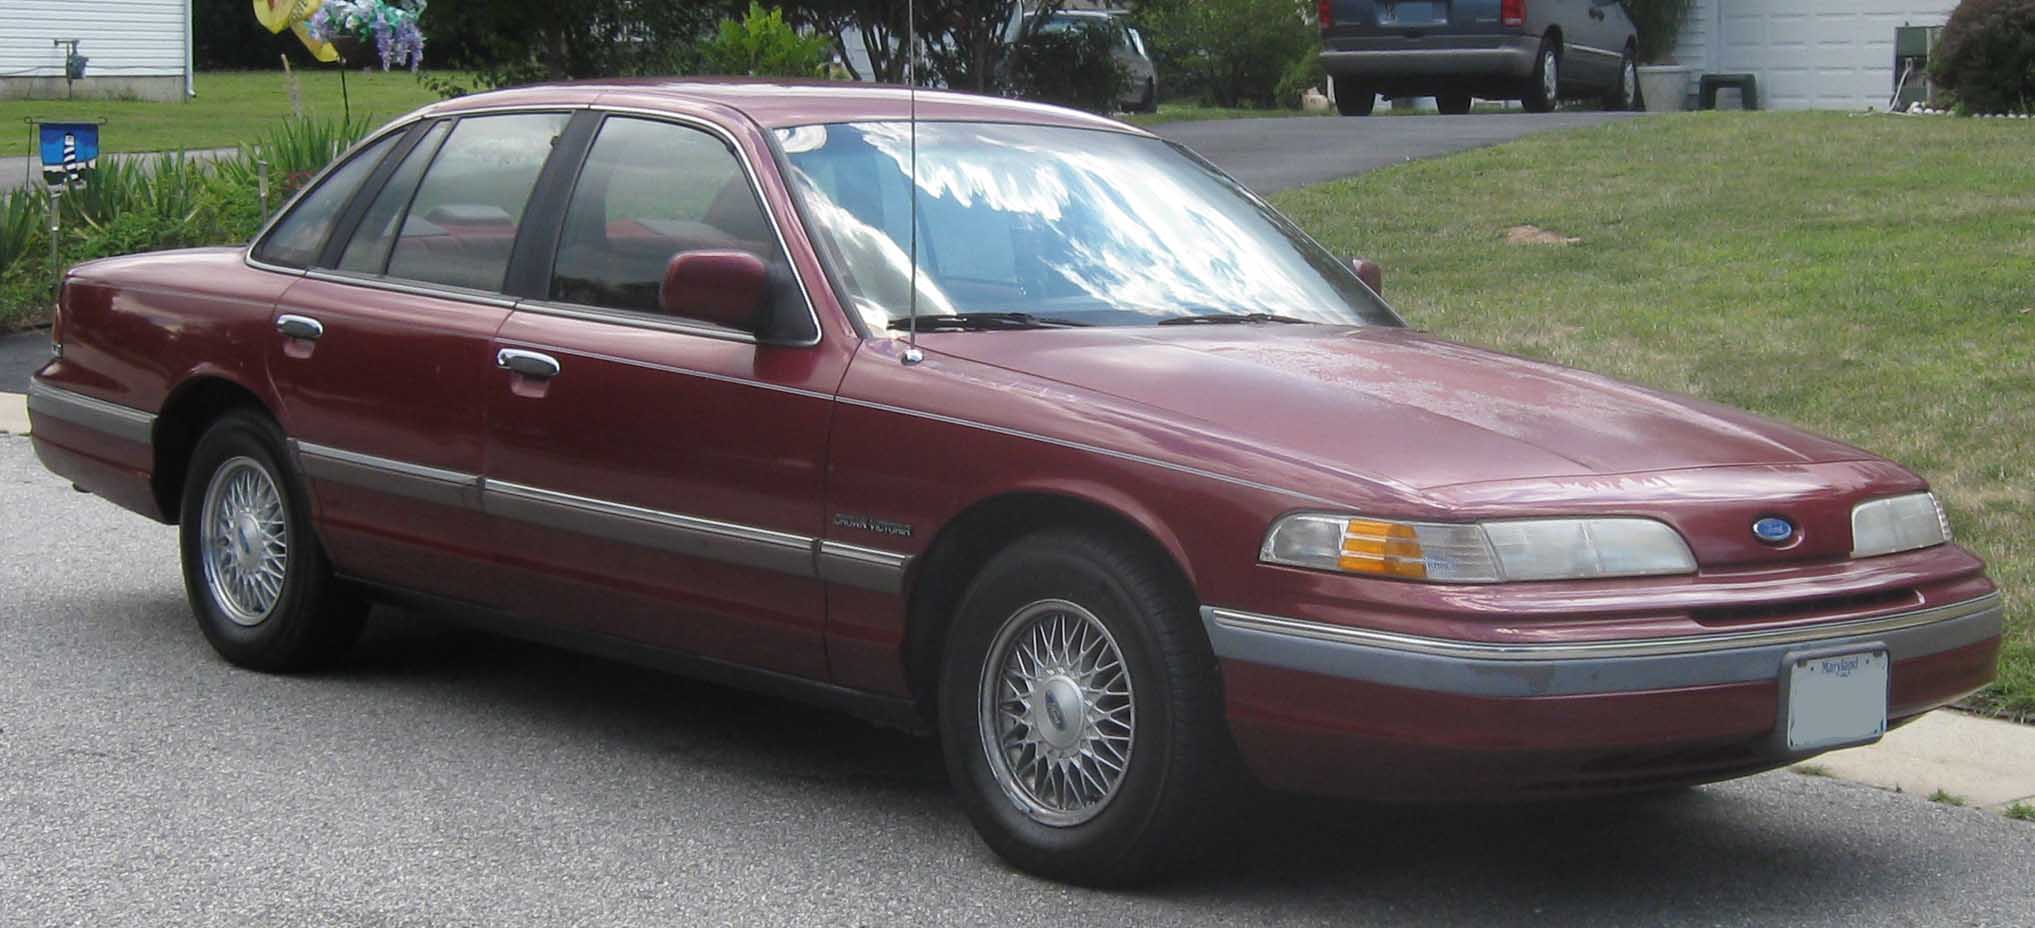 Ford crown victoria production years #4